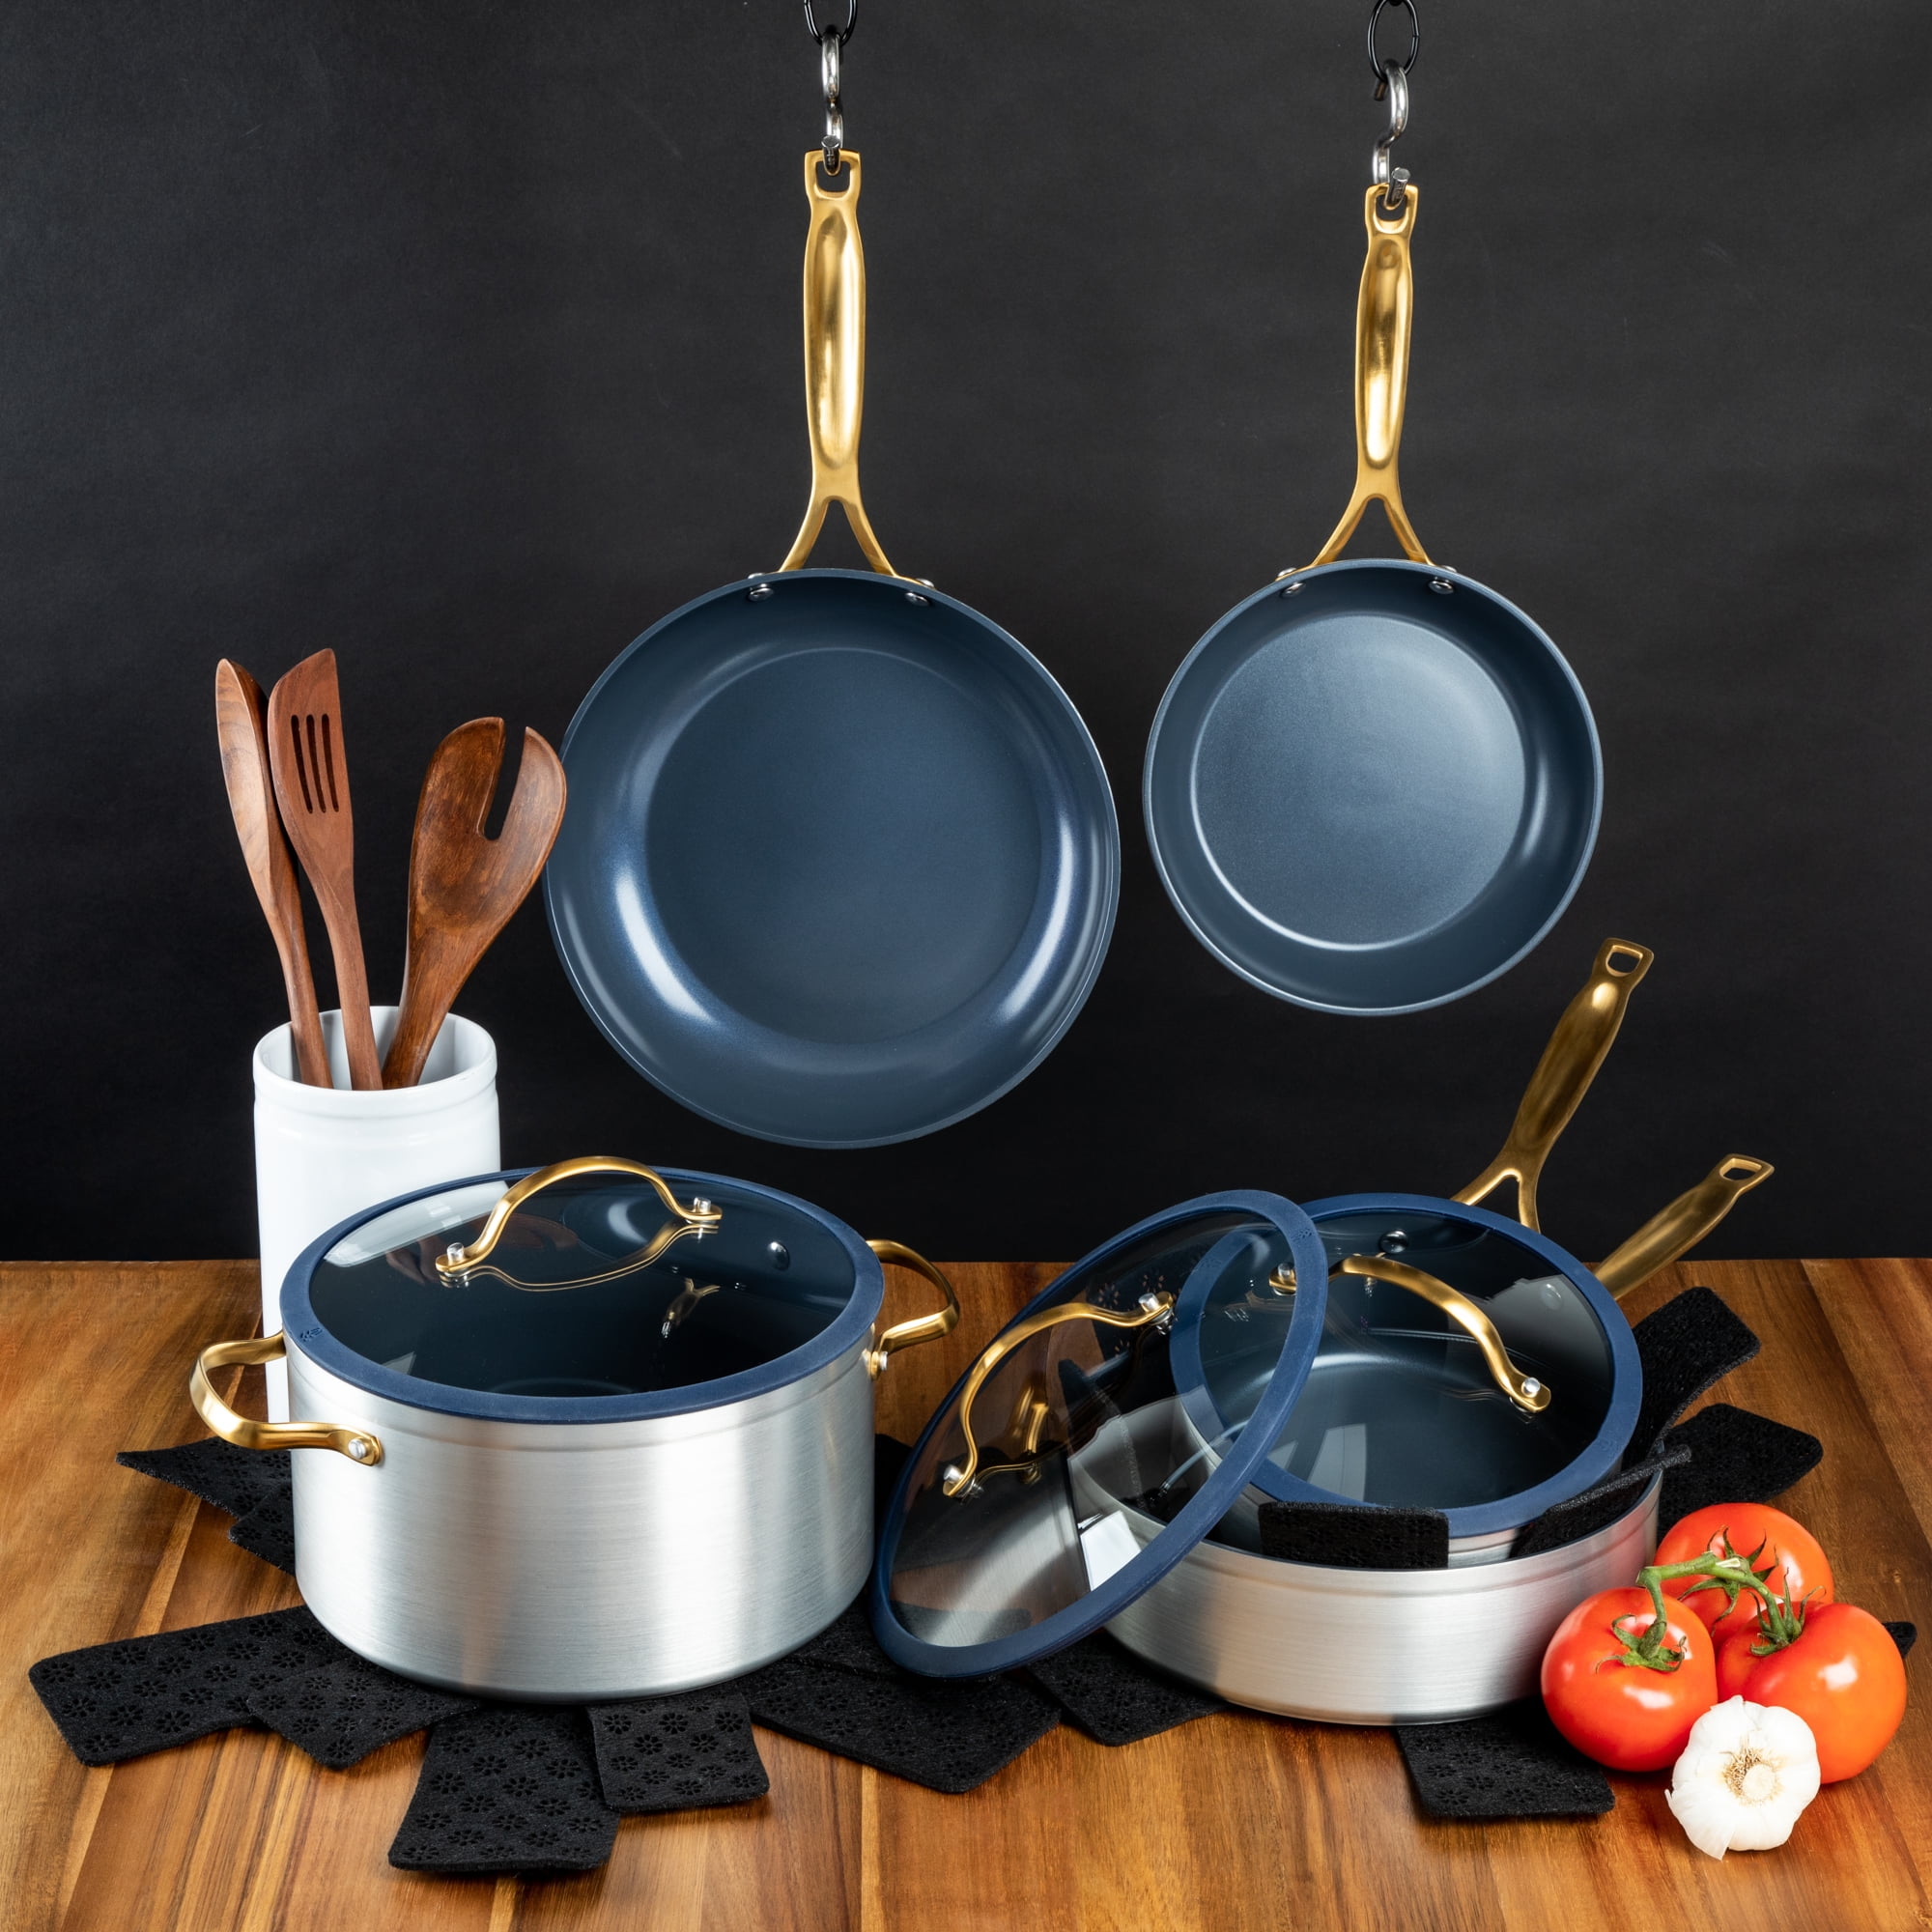 Palm 12 in Cookware Sets